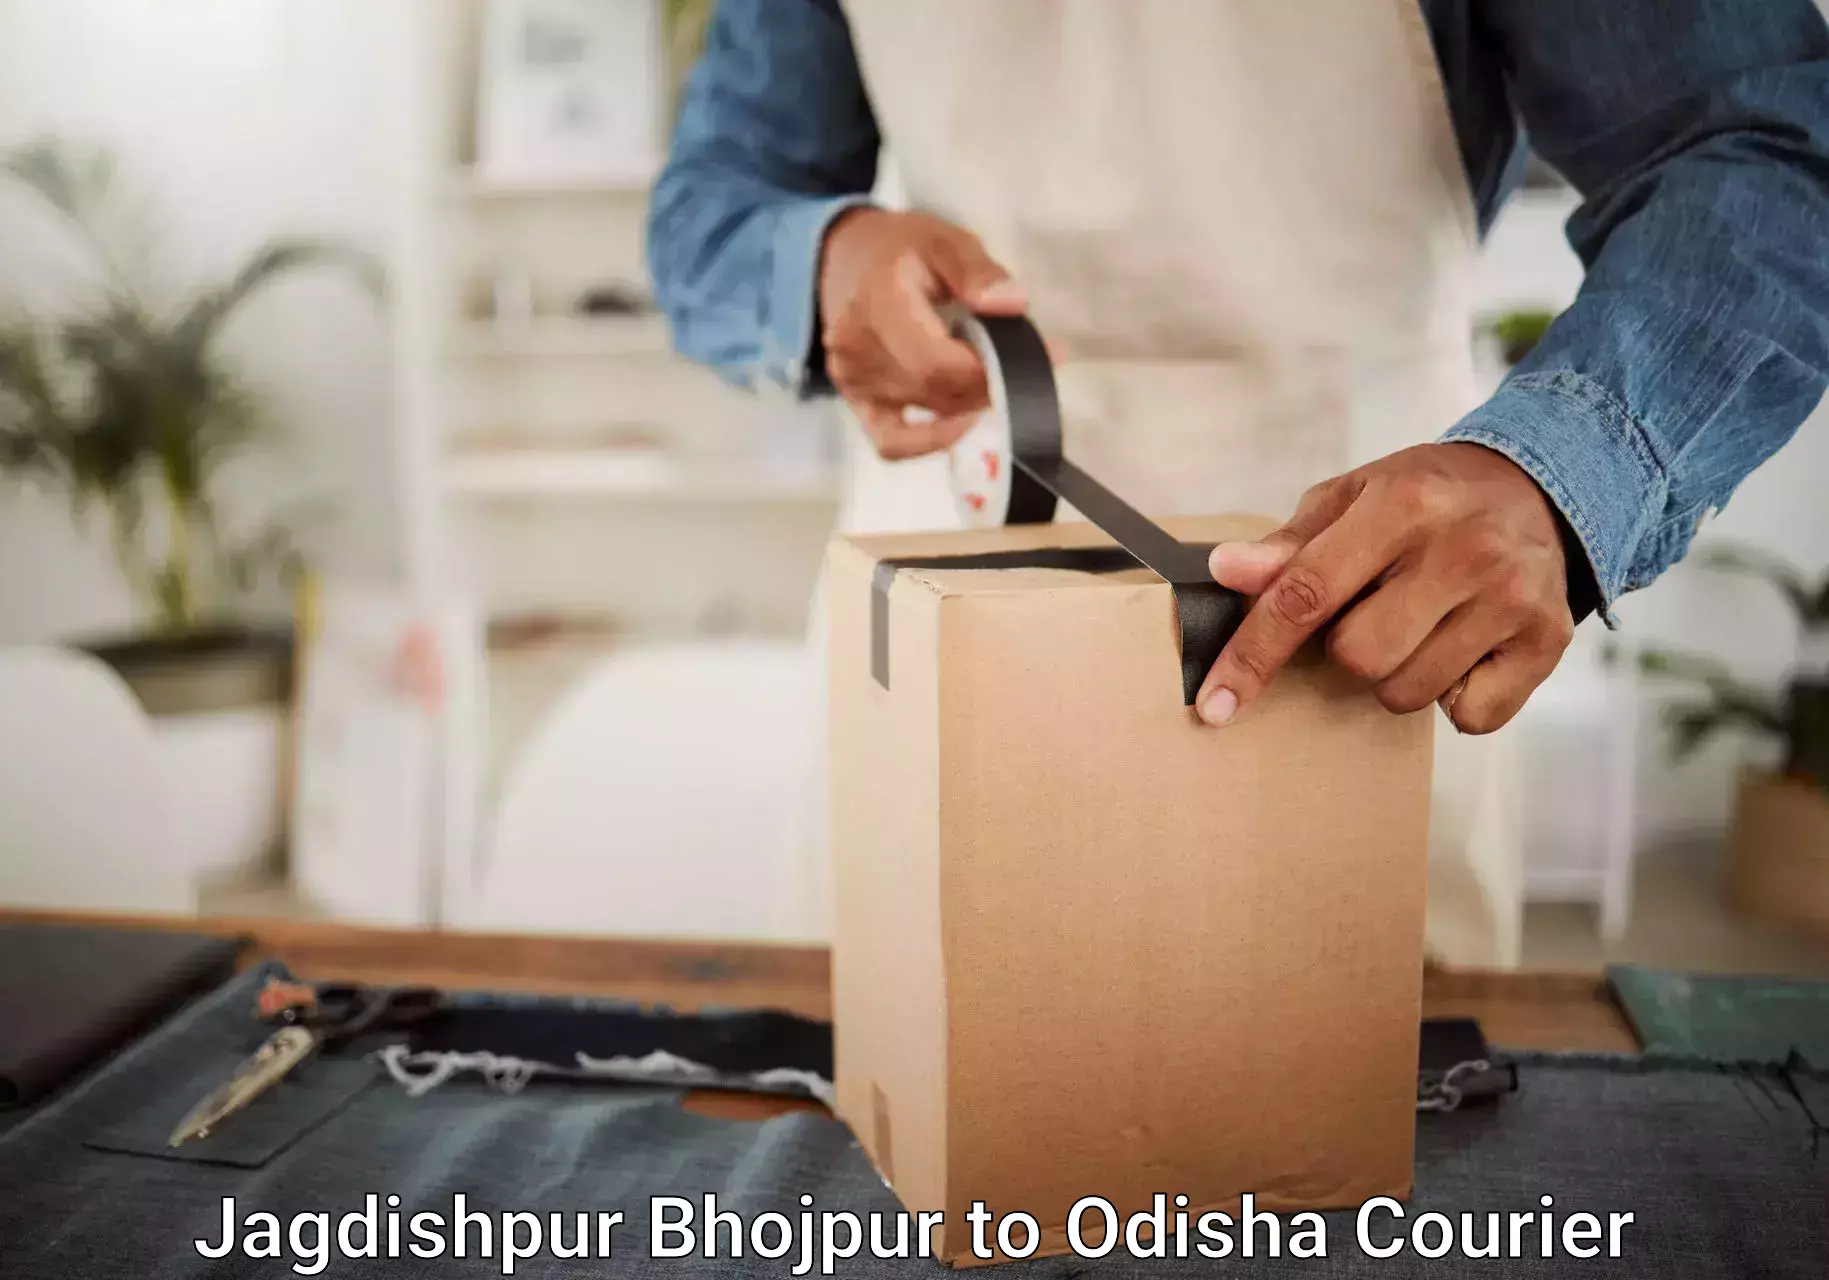 Luggage delivery providers Jagdishpur Bhojpur to Jeypore